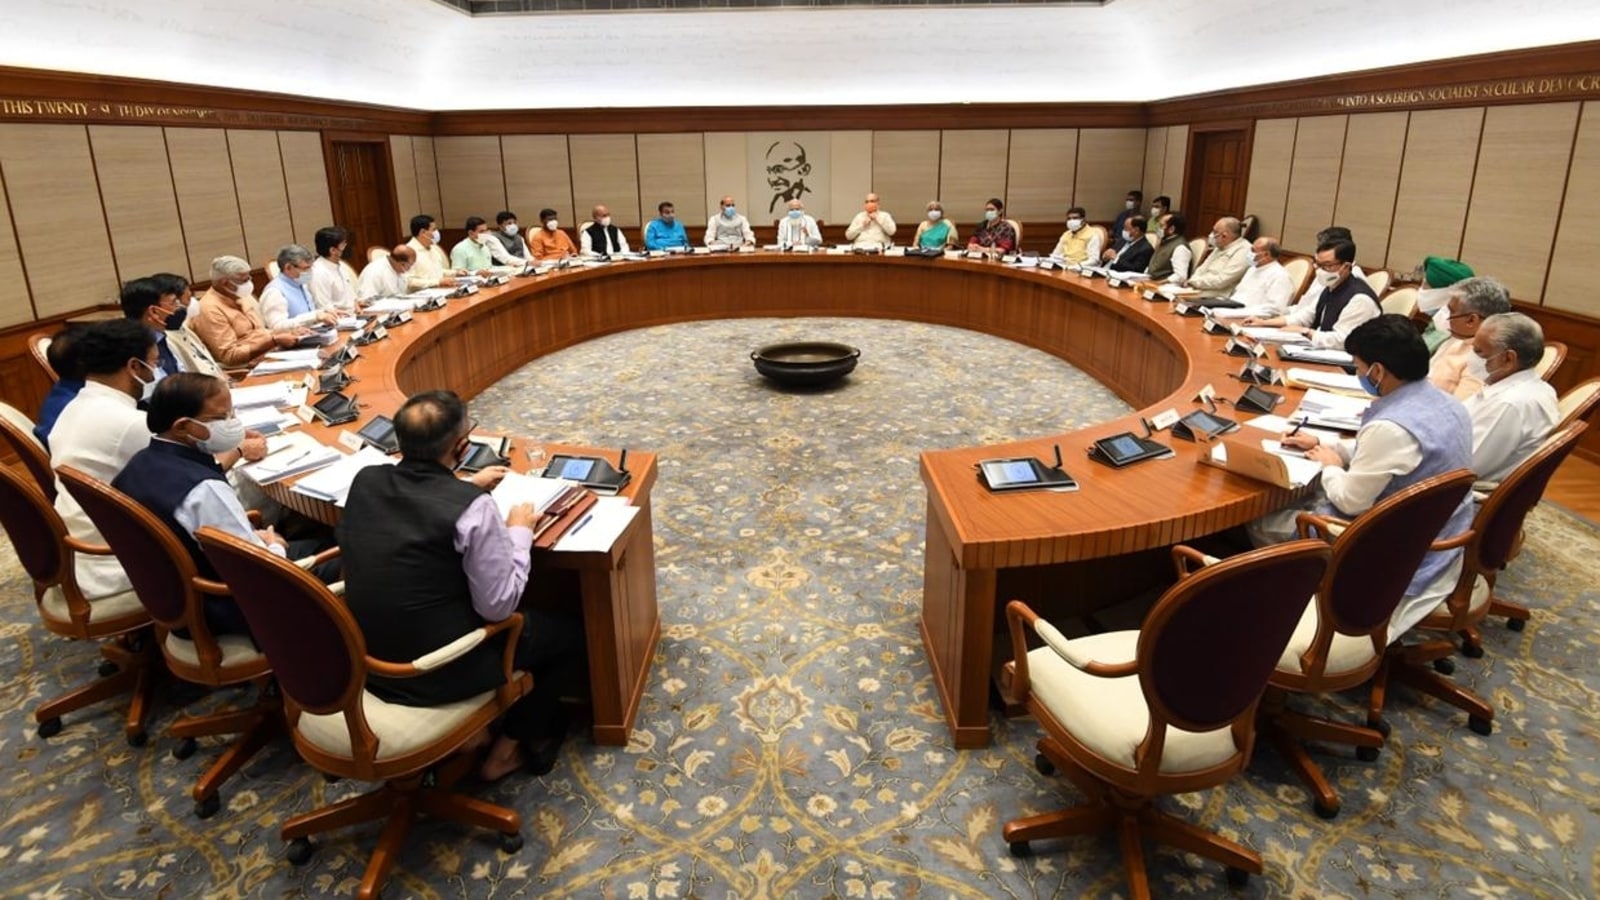 PM Modi chairs in-person Union Cabinet meeting today after more than a year  | Latest News India - Hindustan Times